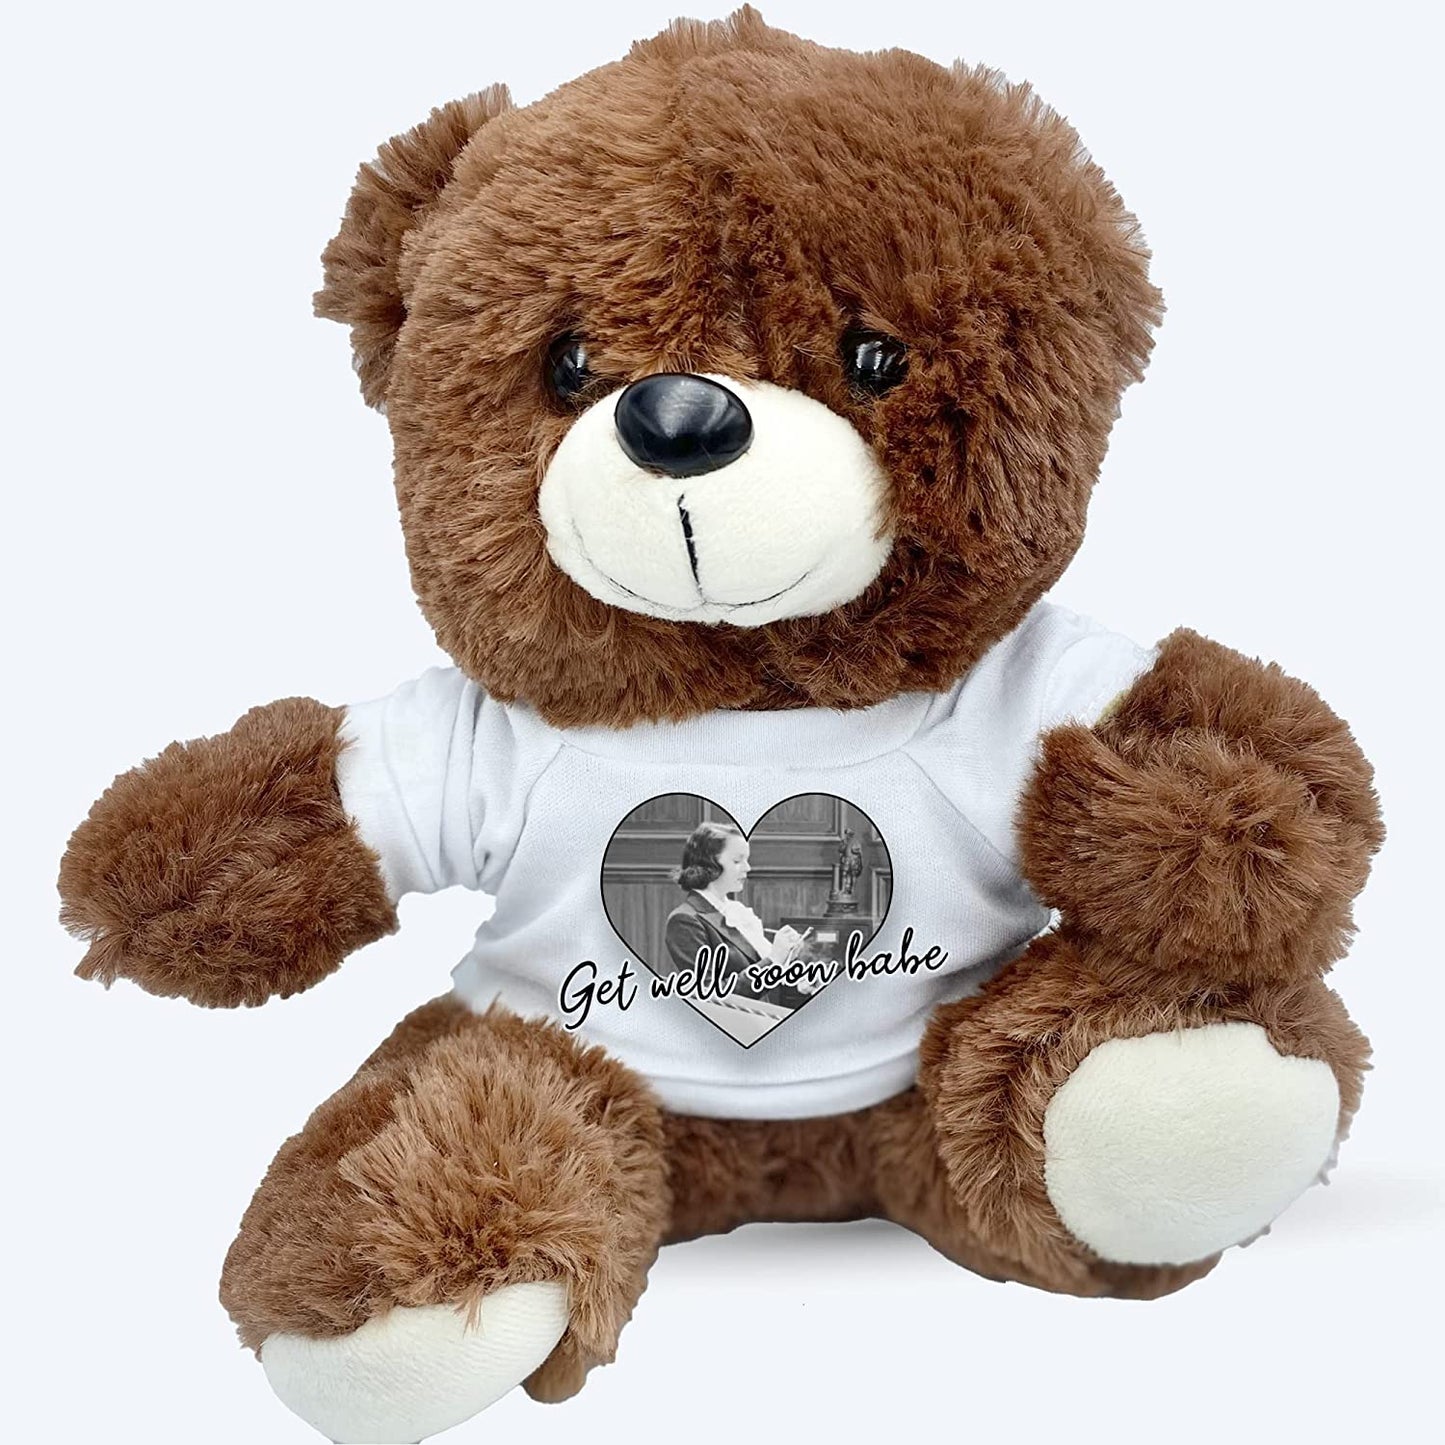 Personalised Teddy Bear Beautiful for All Special Occasions Photo and Text Personalised Teddy Bears with Photo - Christmas Gift